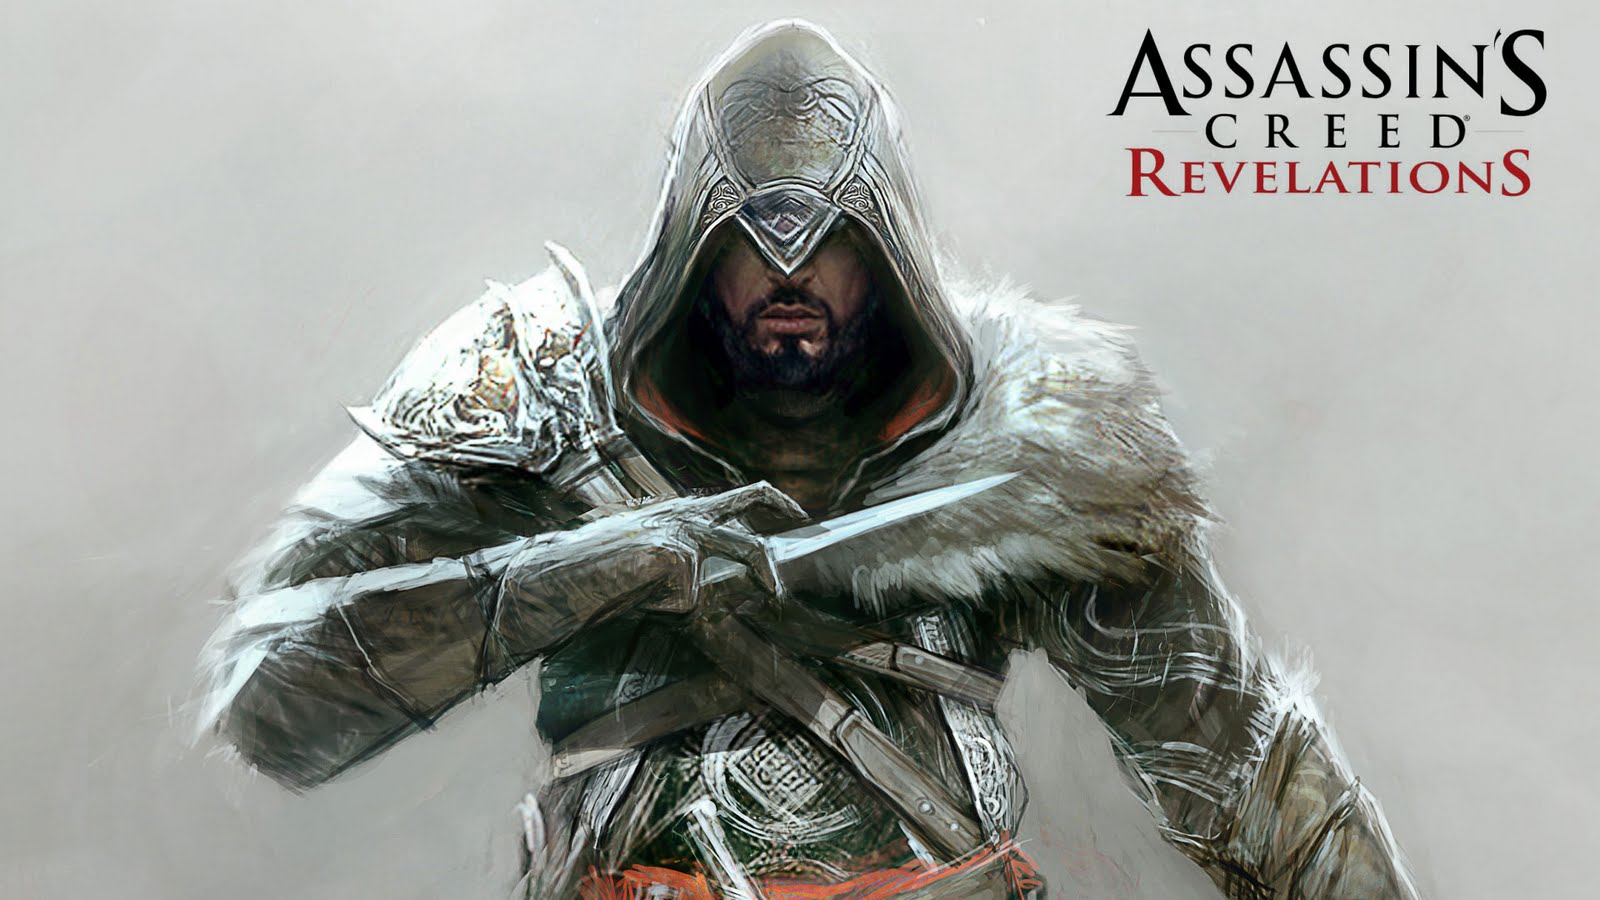 assassin's creed revelations wallpaper,action figure,fictional character,pc game,outerwear,cg artwork